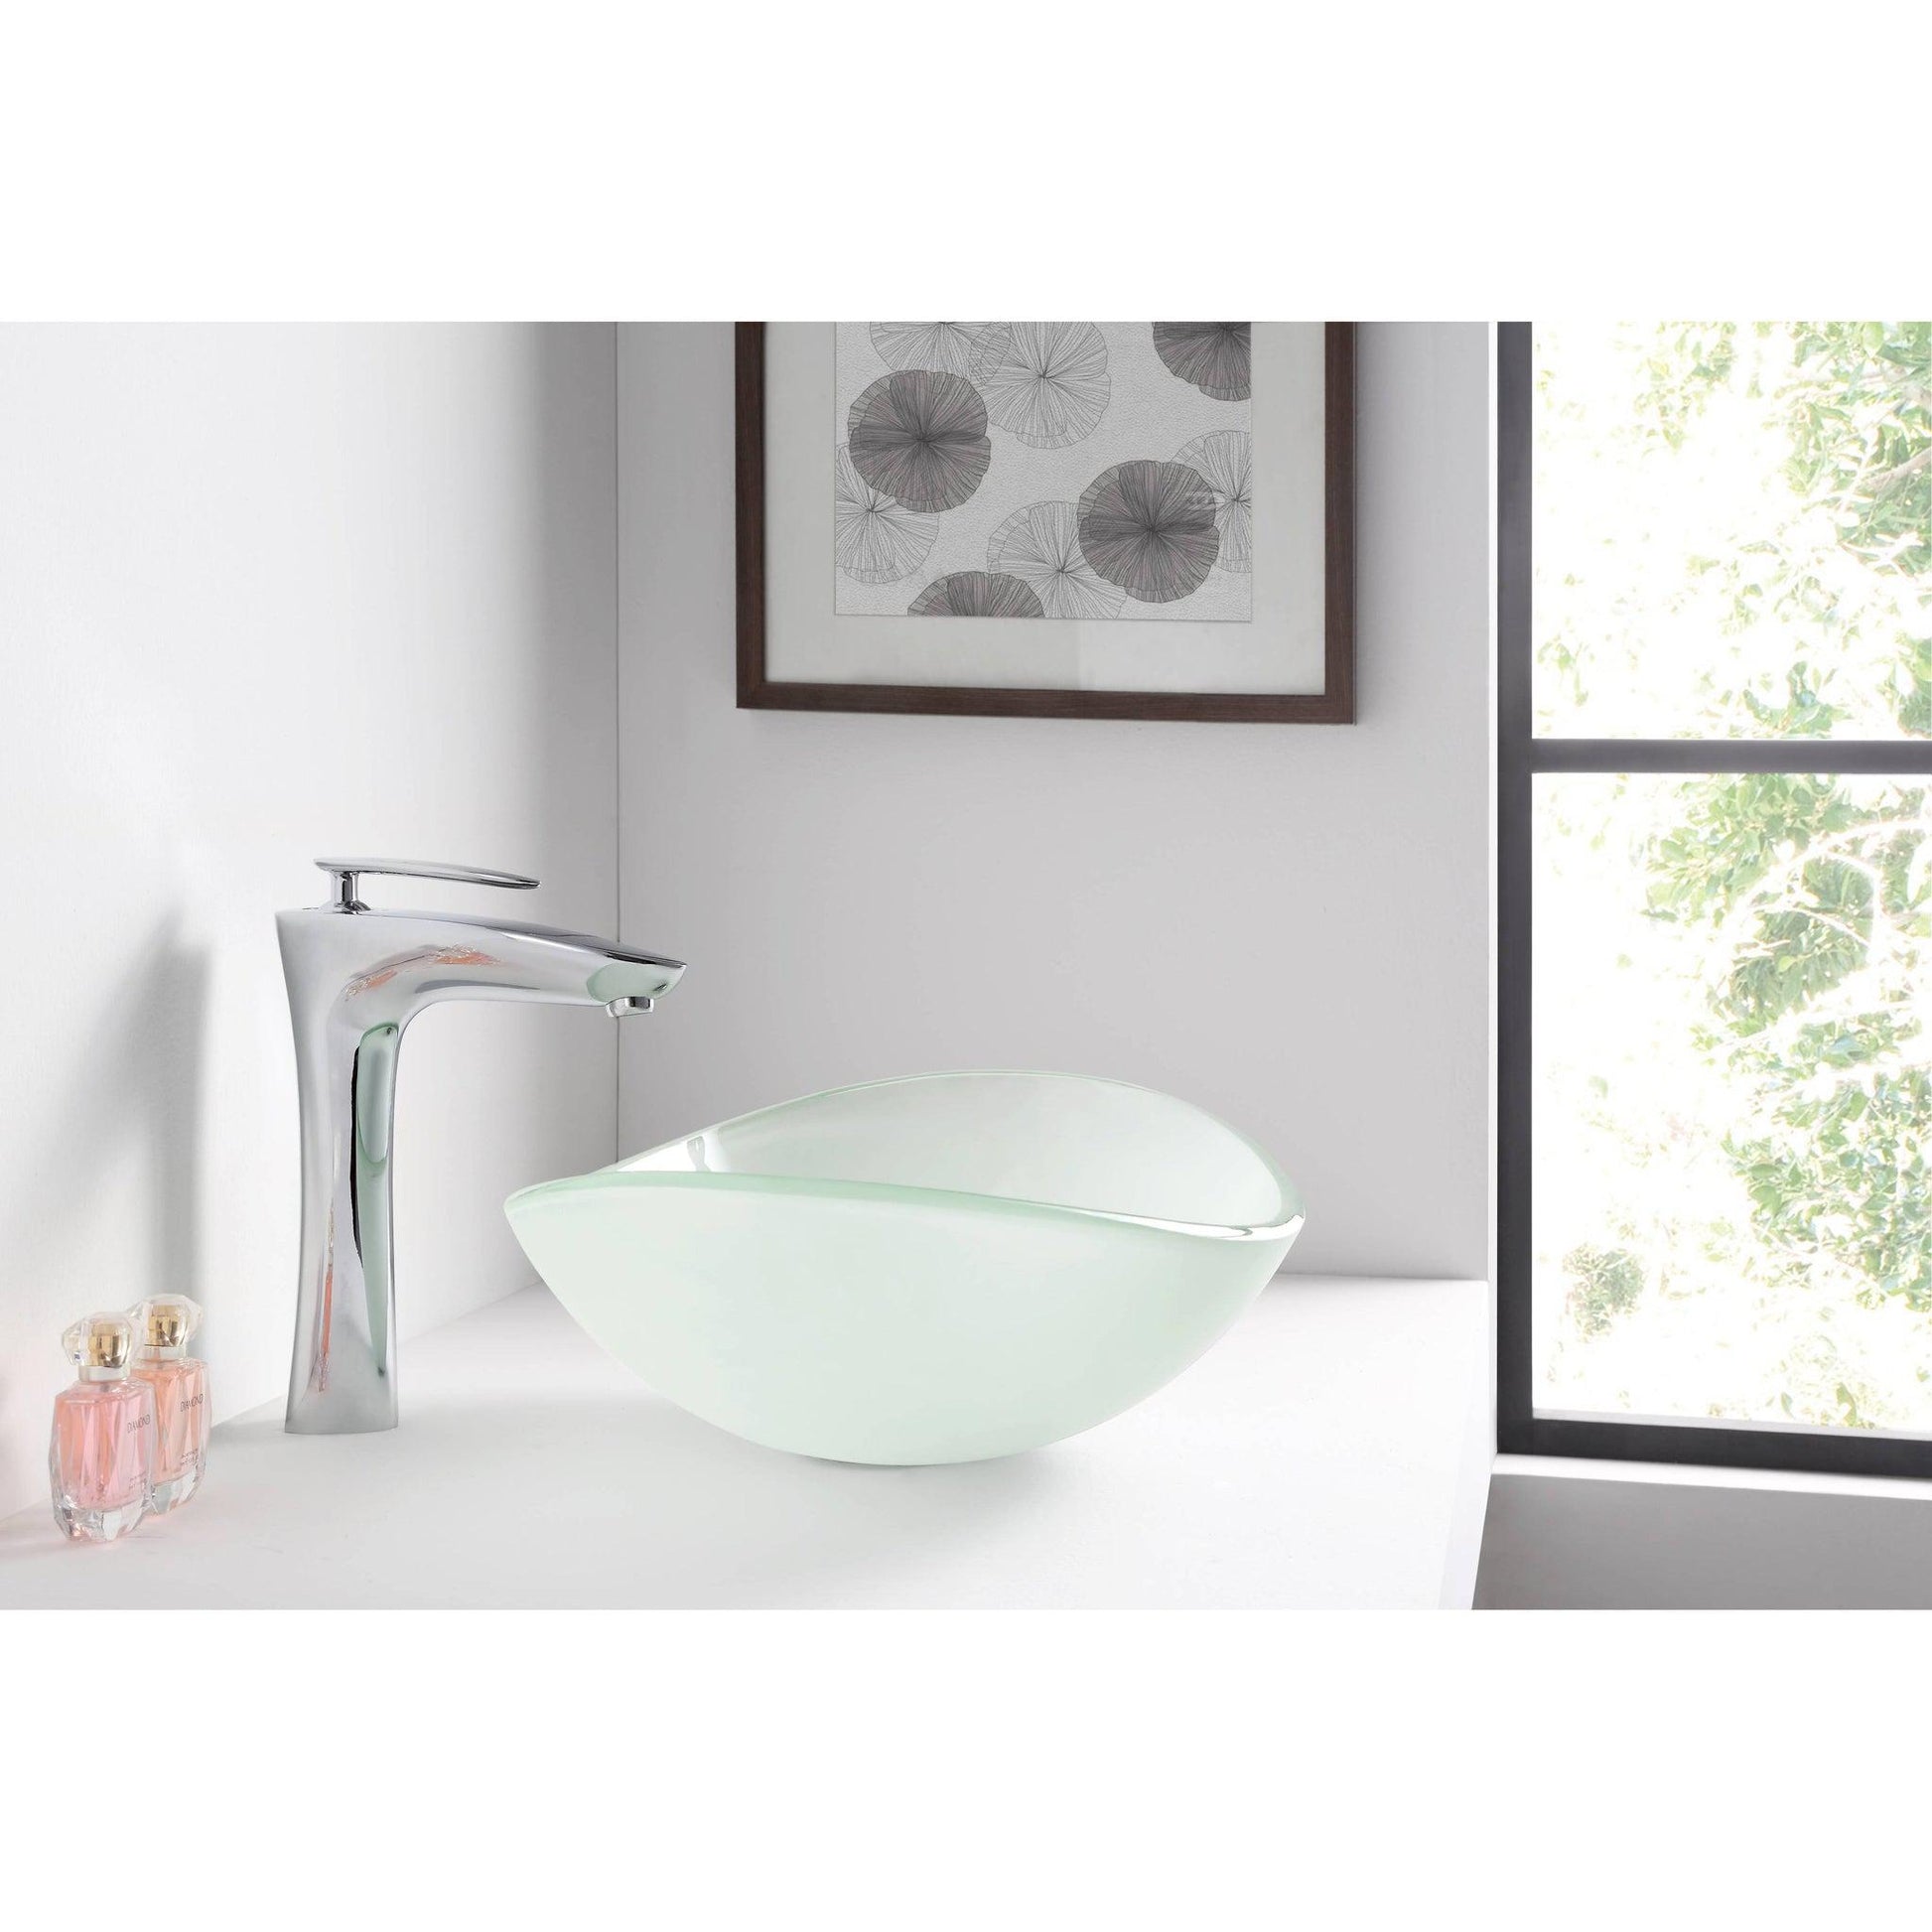 ANZZI Forza Series 21" x 15" Oval Shape Lustrous Frosted Deco-Glass Vessel Sink With Polished Chrome Pop-Up Drain